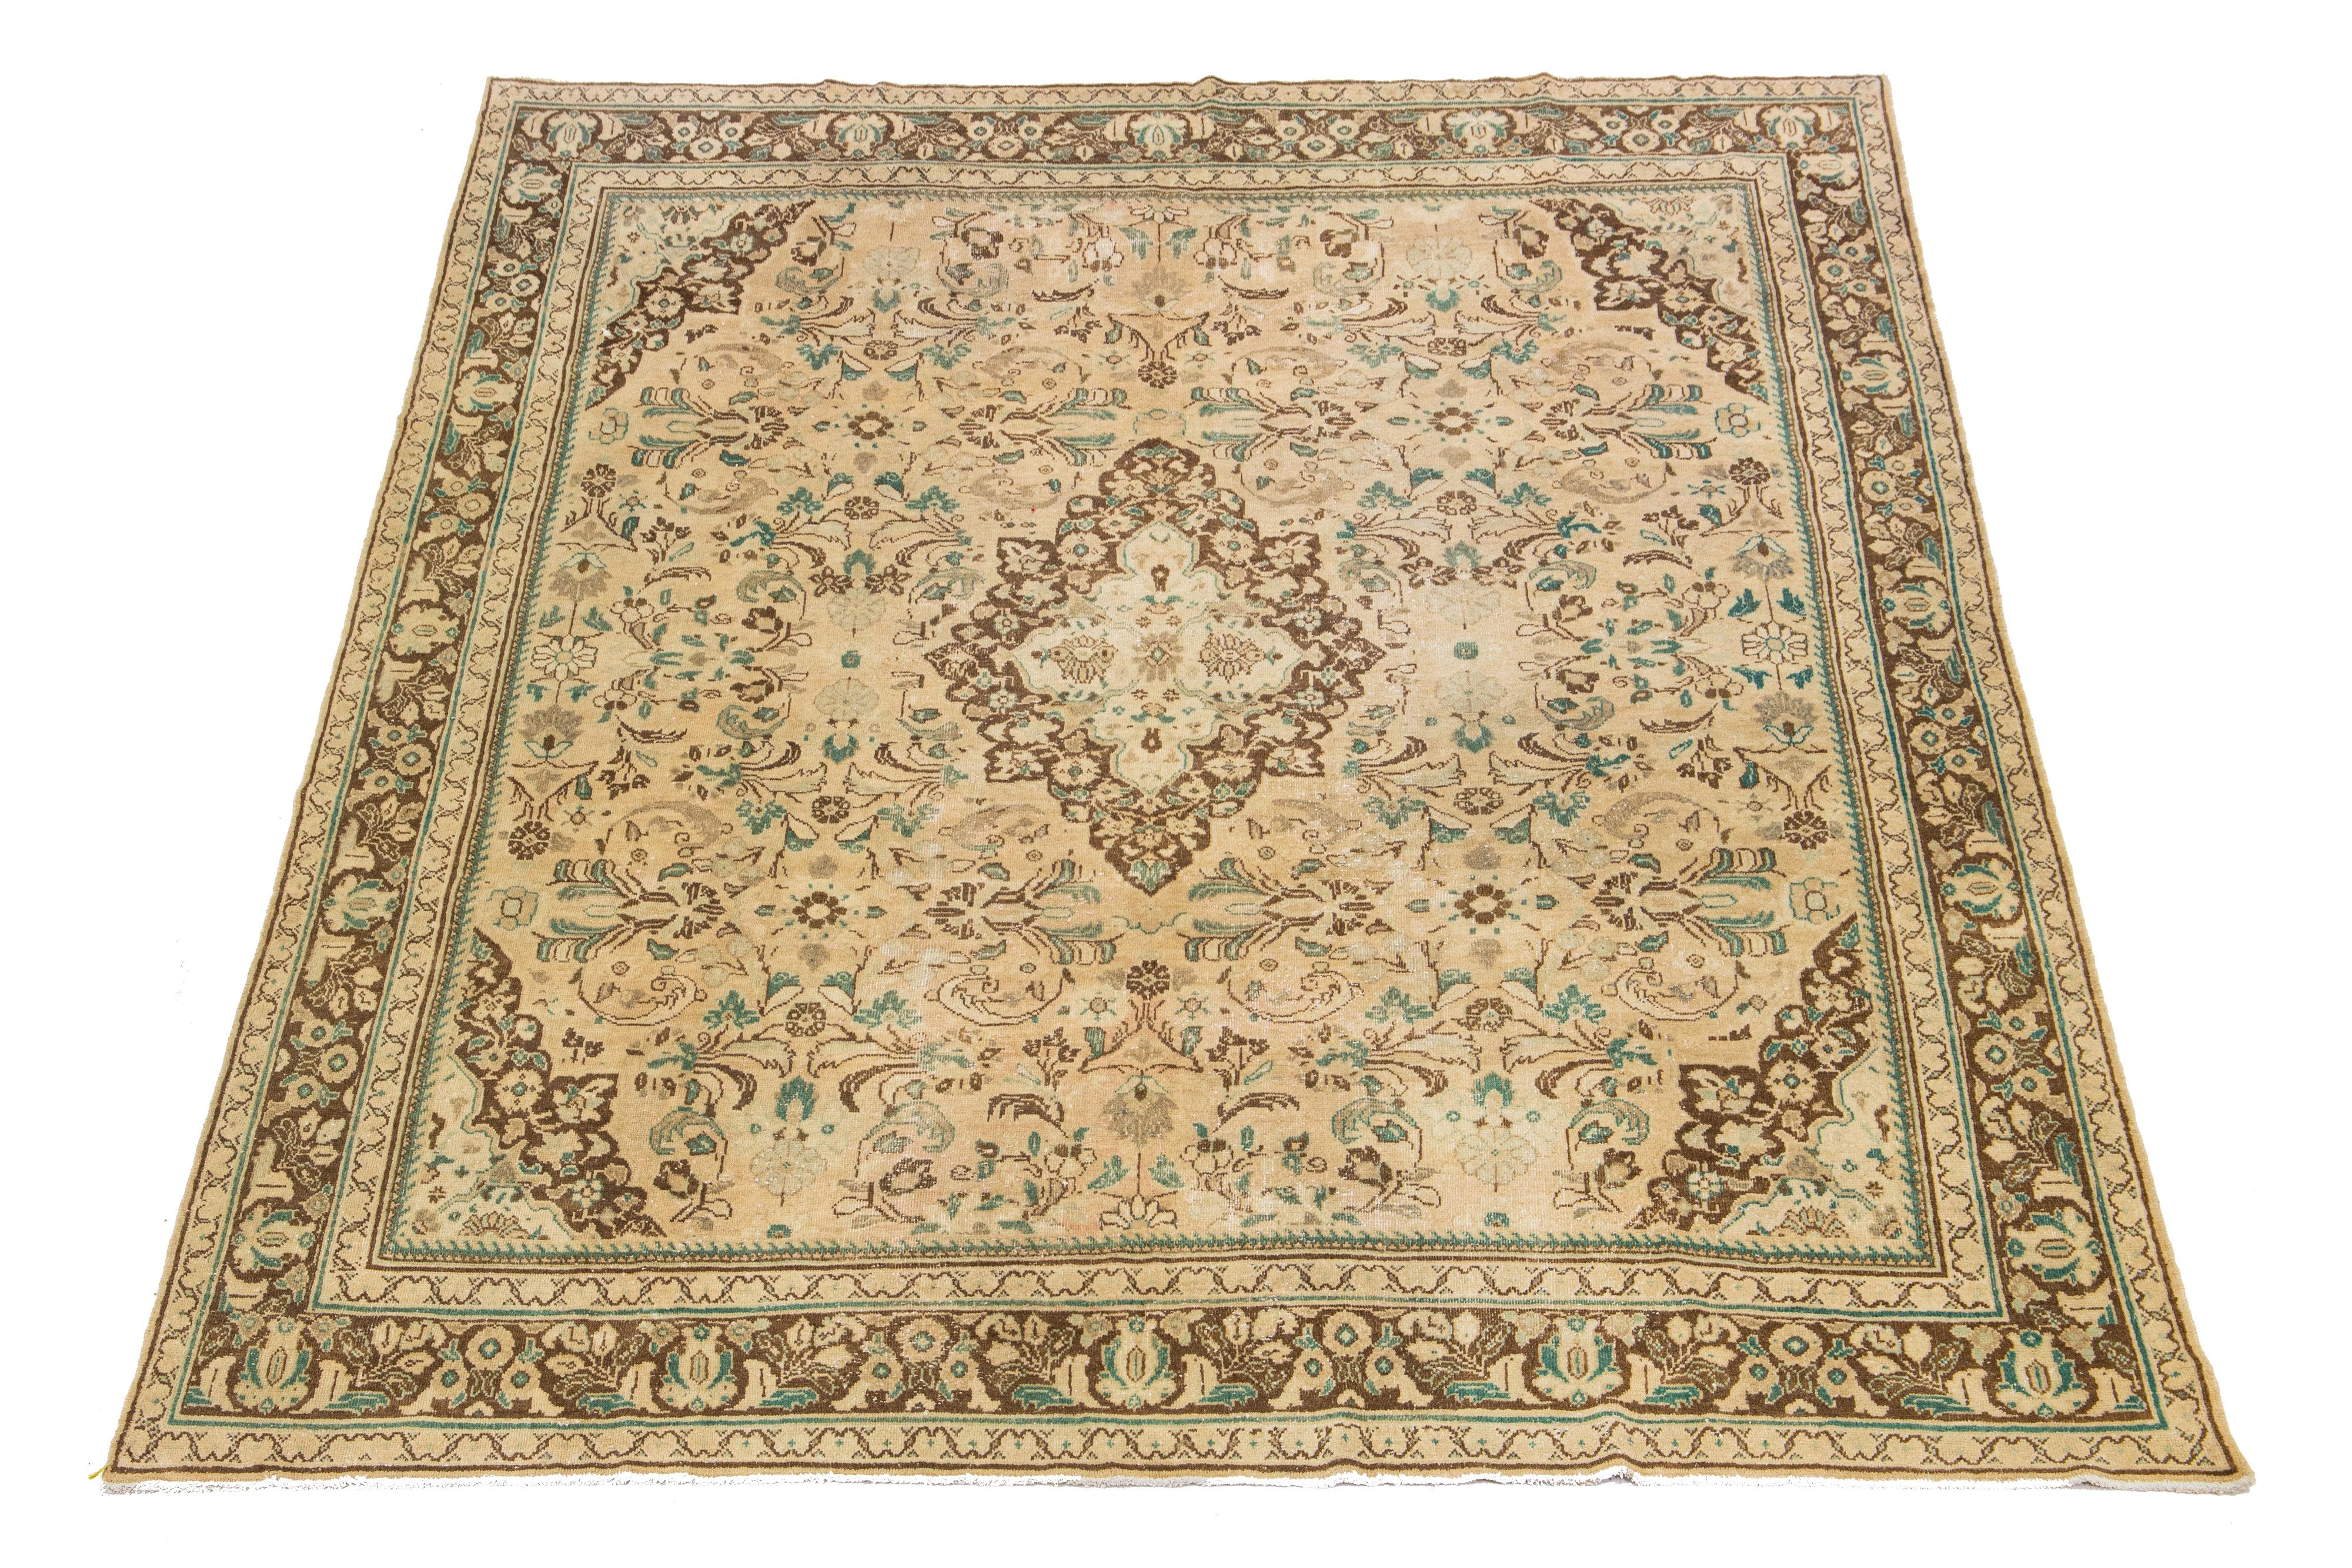 Beautiful Vintage Mahal hand-knotted wool rug with a tan color field. This Persian rug has classic green and brown hues throughout the floral motif.

This rug measures 10'5